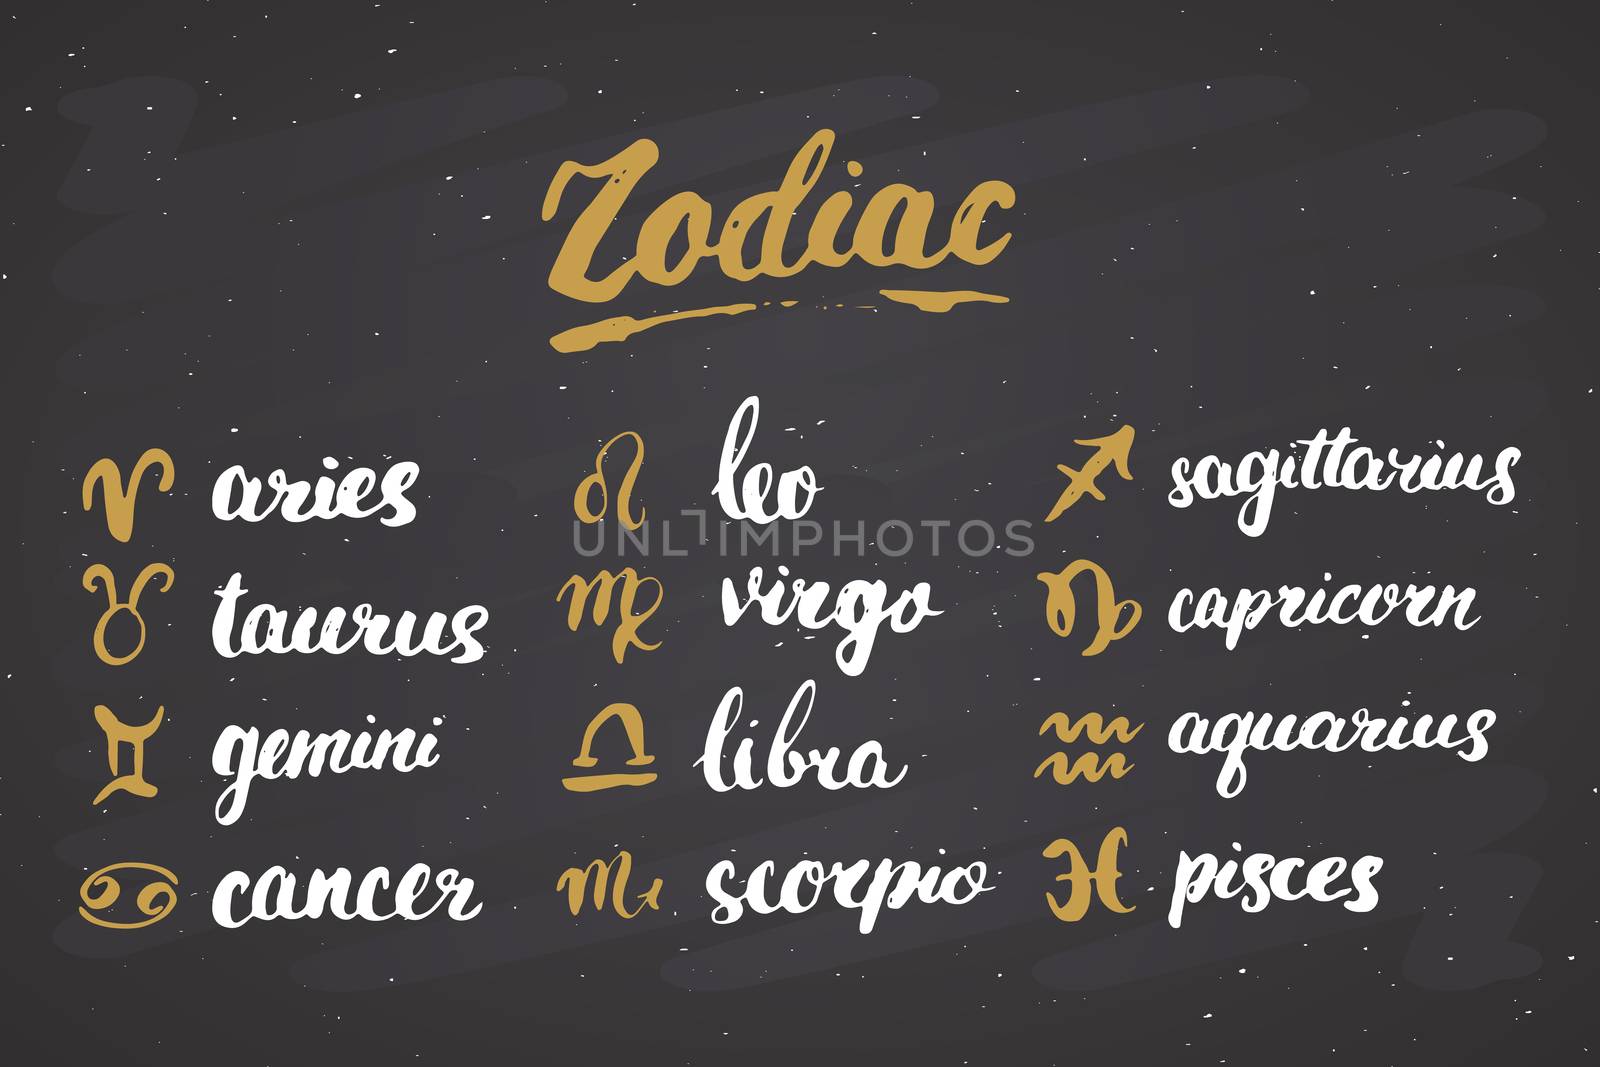 Zodiac signs set and letterings. Hand drawn horoscope astrology symbols, grunge textured design, typography print, vector illustration on chalkboard background.